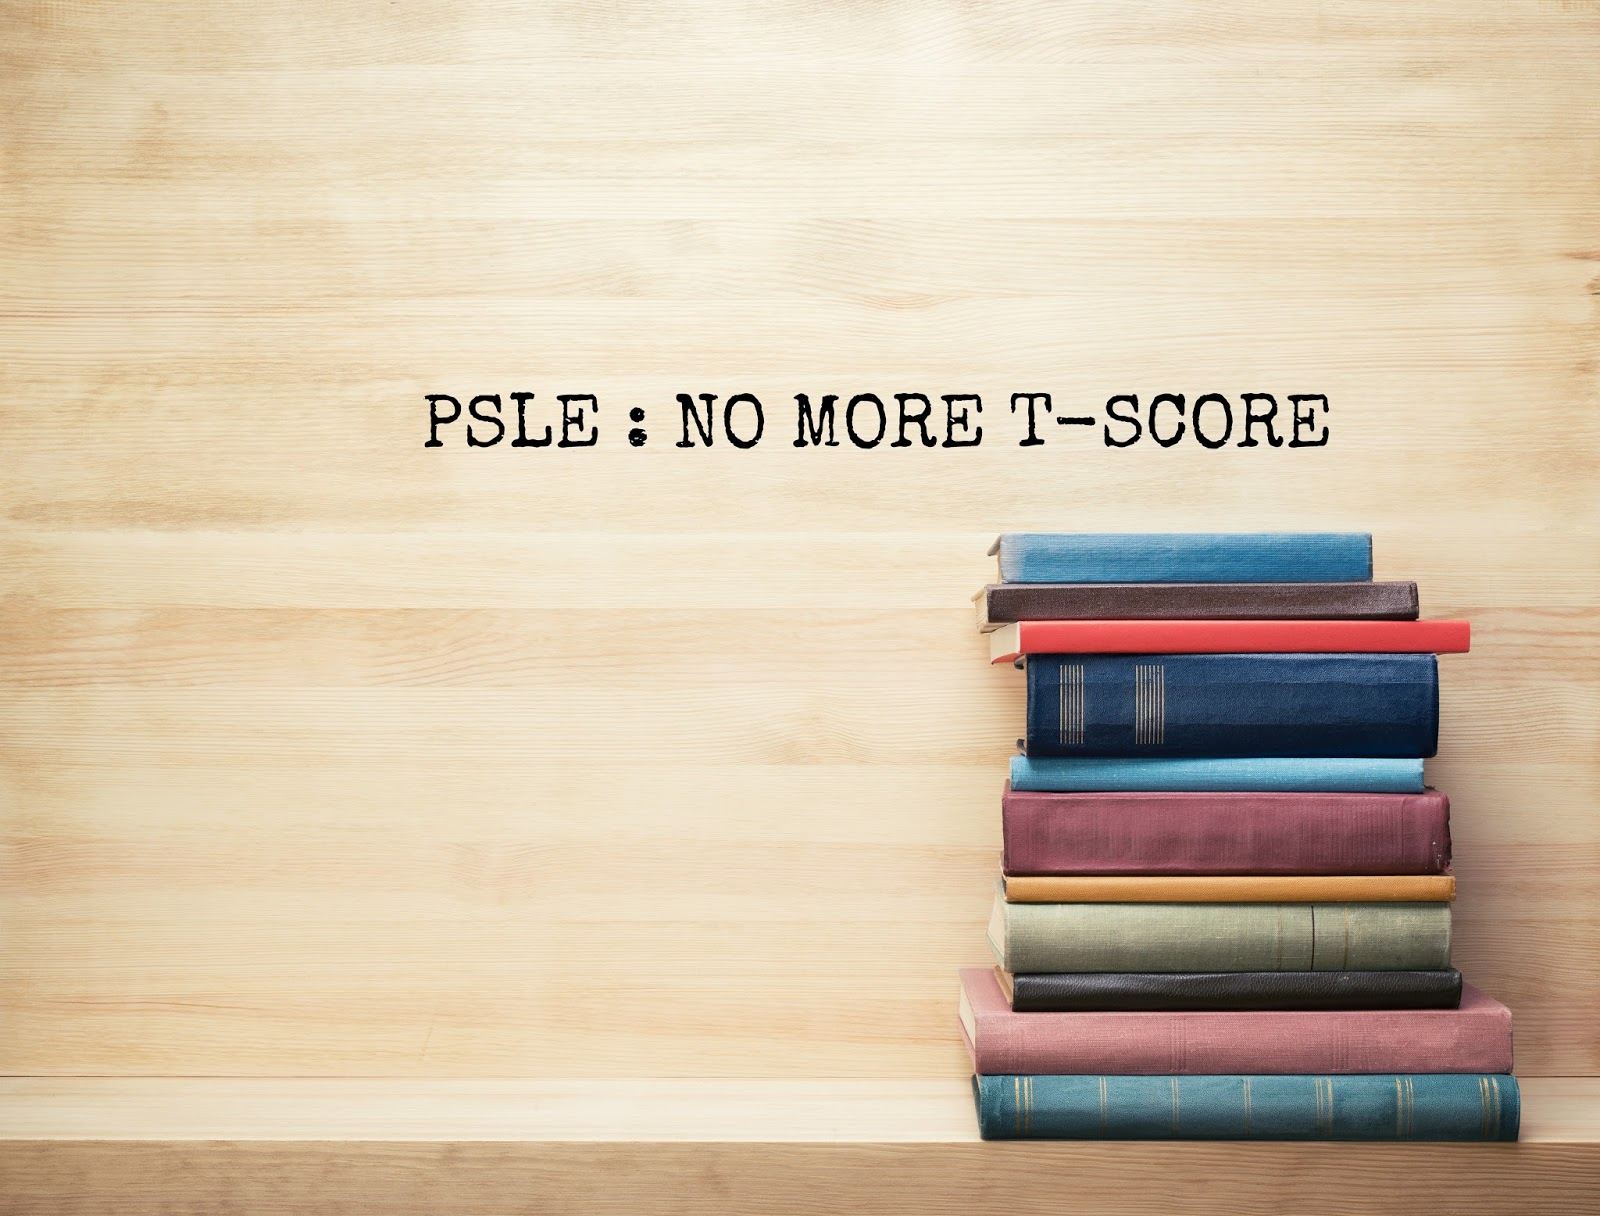 PSLE Changes :  Changes and concerns